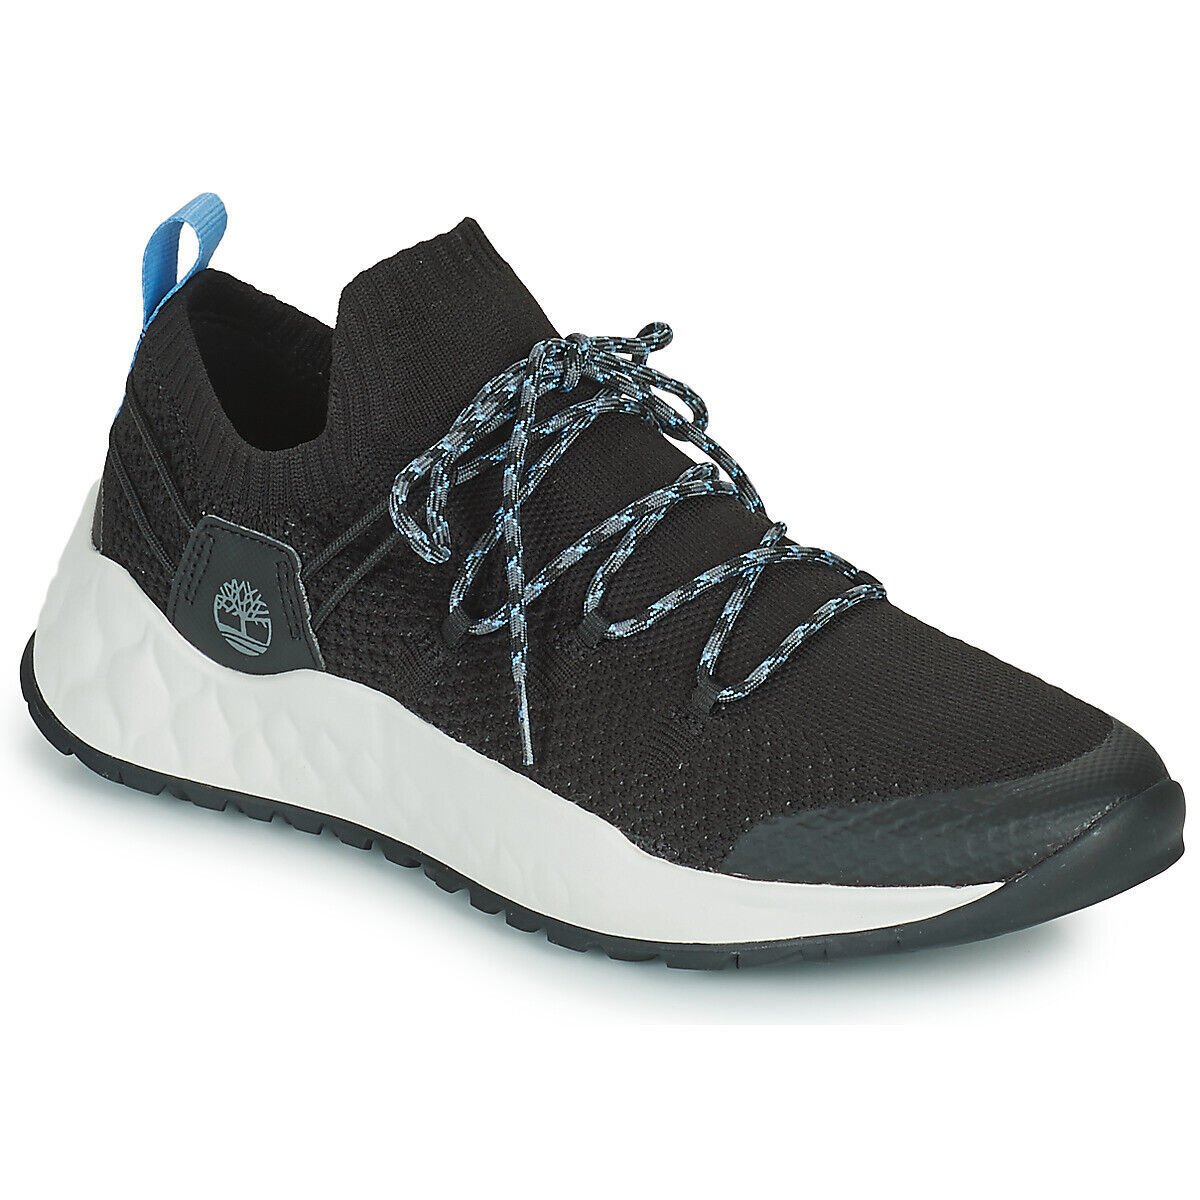 NEW TIMBERLAND Men's Solar Wave Low Hiking Sneakers - Black Knit (Size 7 M) - $89.95